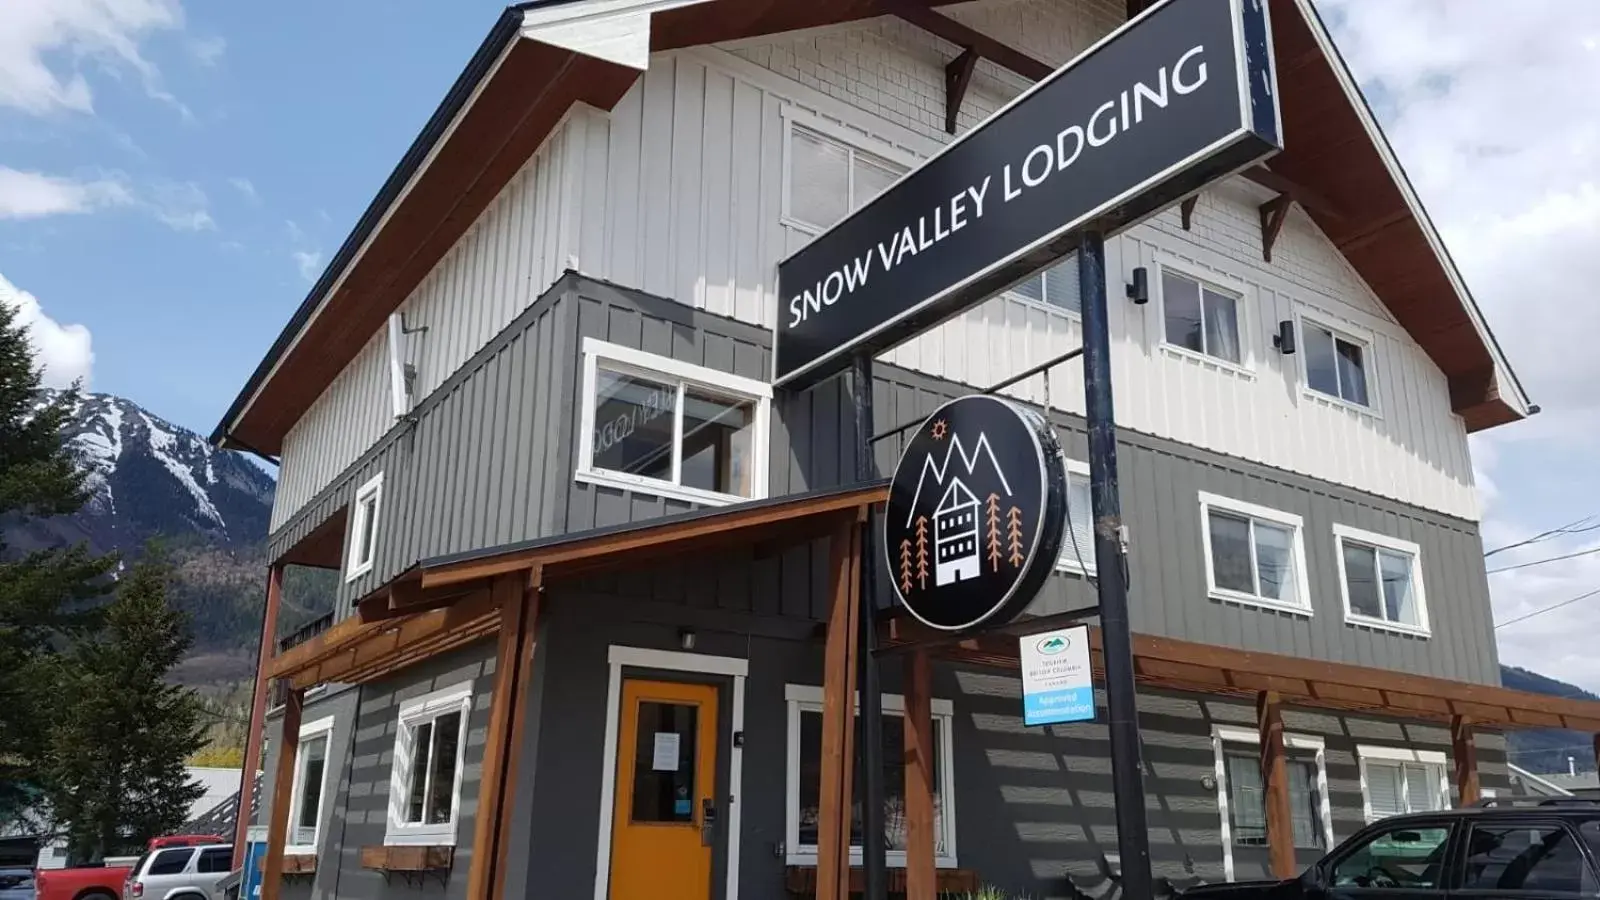 Property Building in Tiny Homes by Snow Valley Lodging